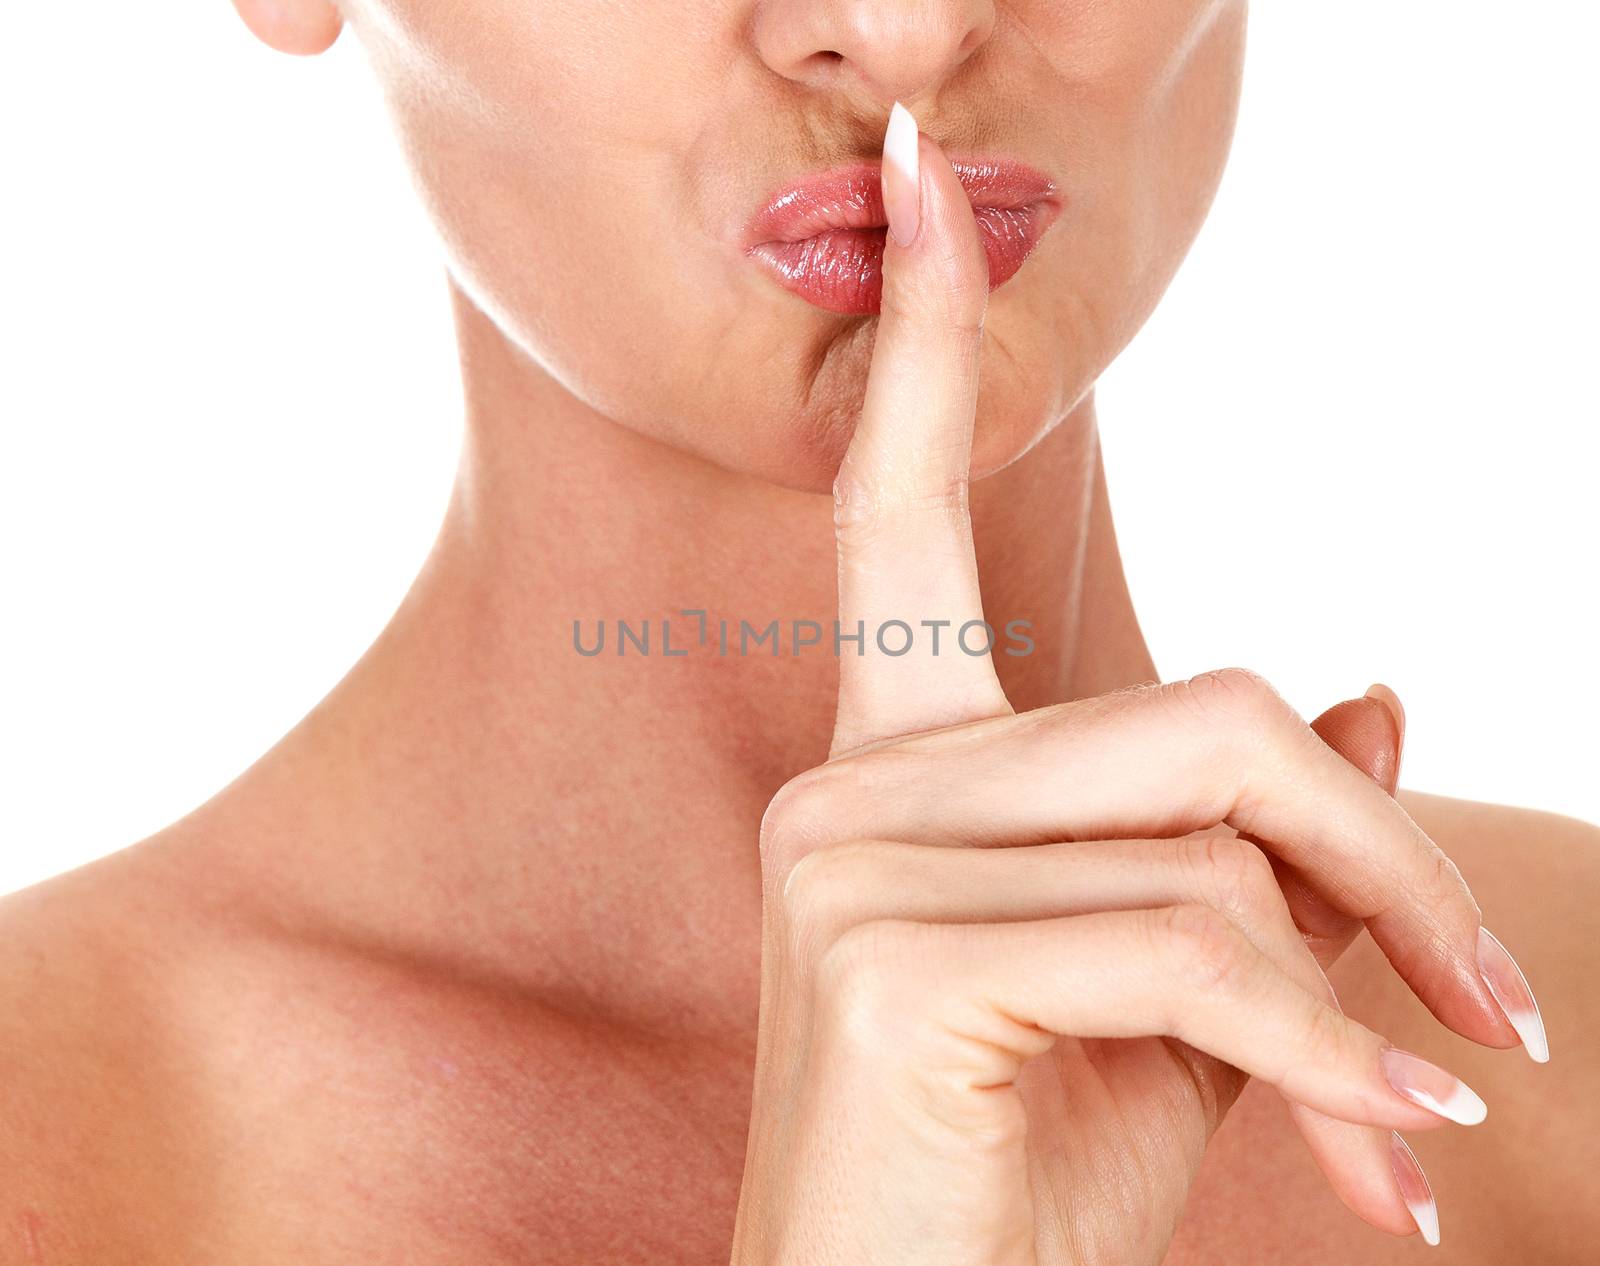 Lady asks for silence, isolated on white background